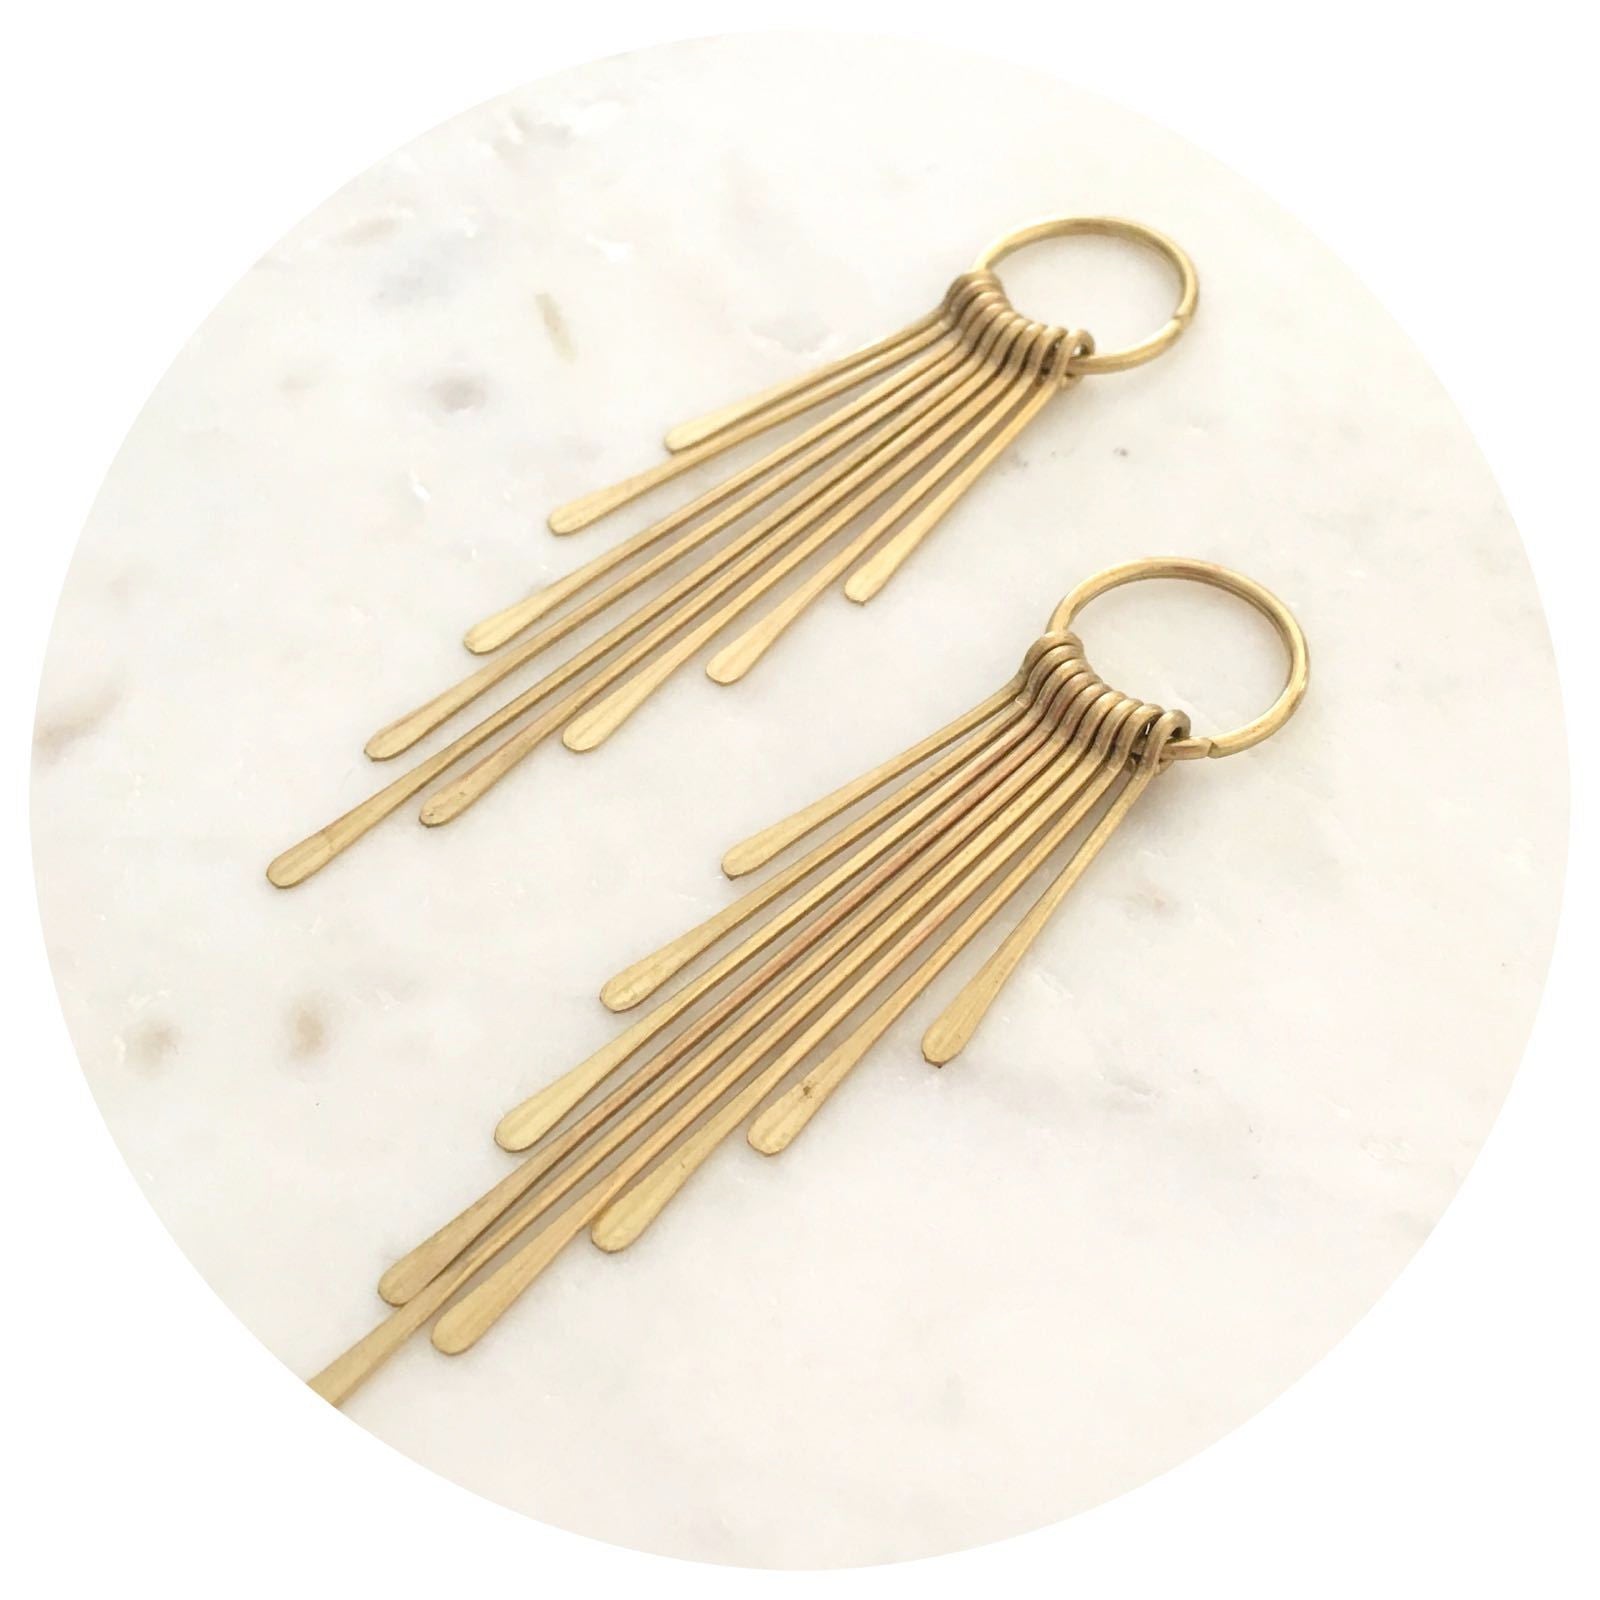 82mm Fringed Pendant Hammered Ends - Raw Brass - 2 pcs - E380